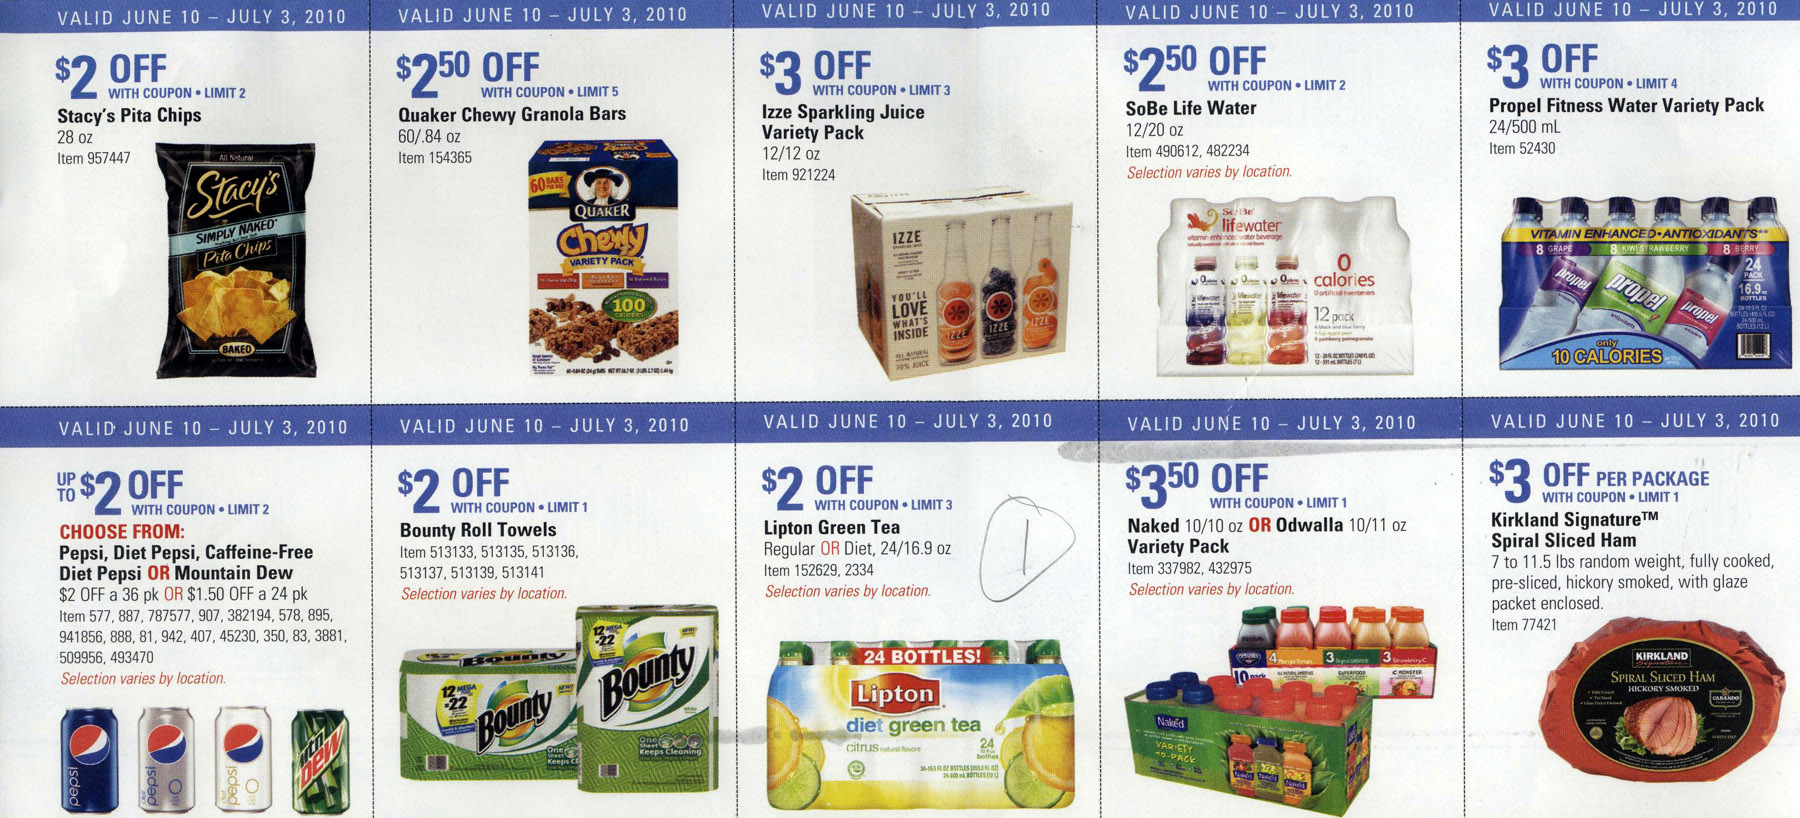 Coupon book full size page ->1<-